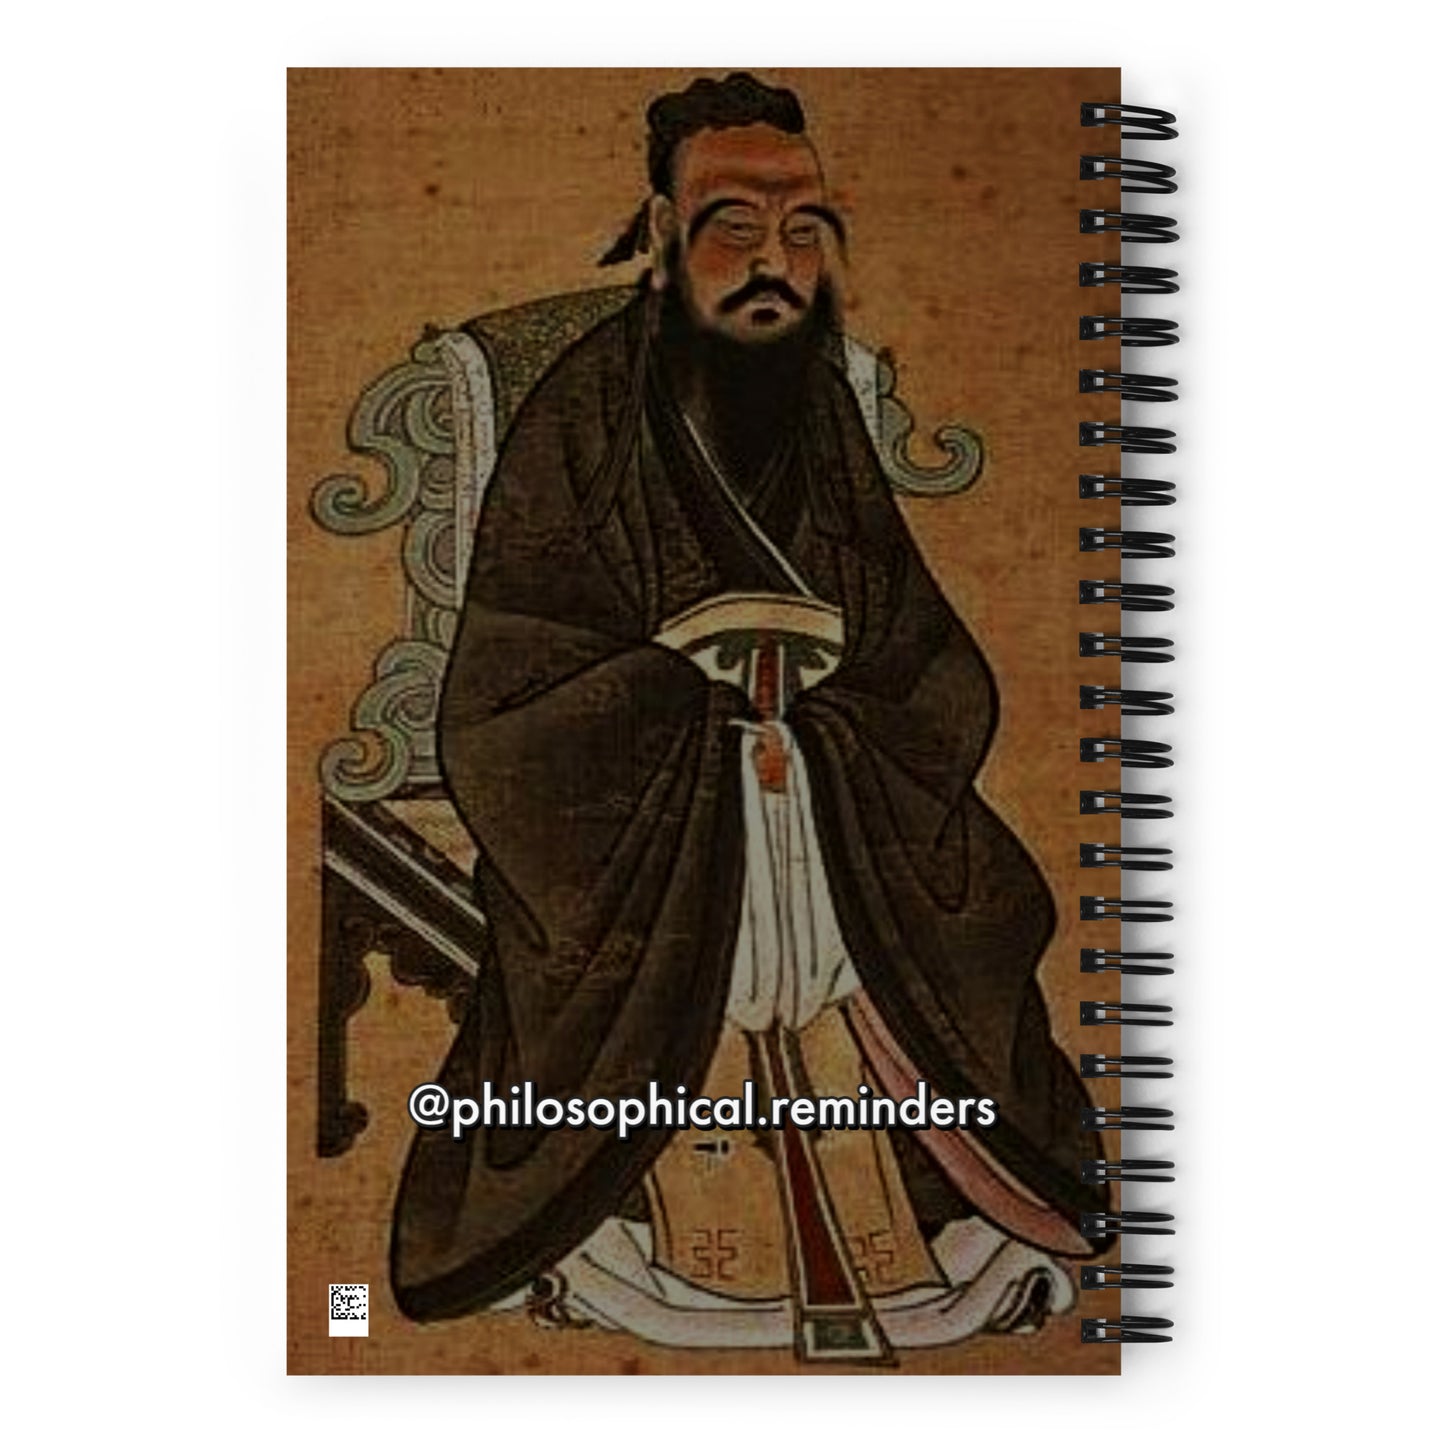 "Wherever you go, go with all your heart" ~Confucius Spiral notebook